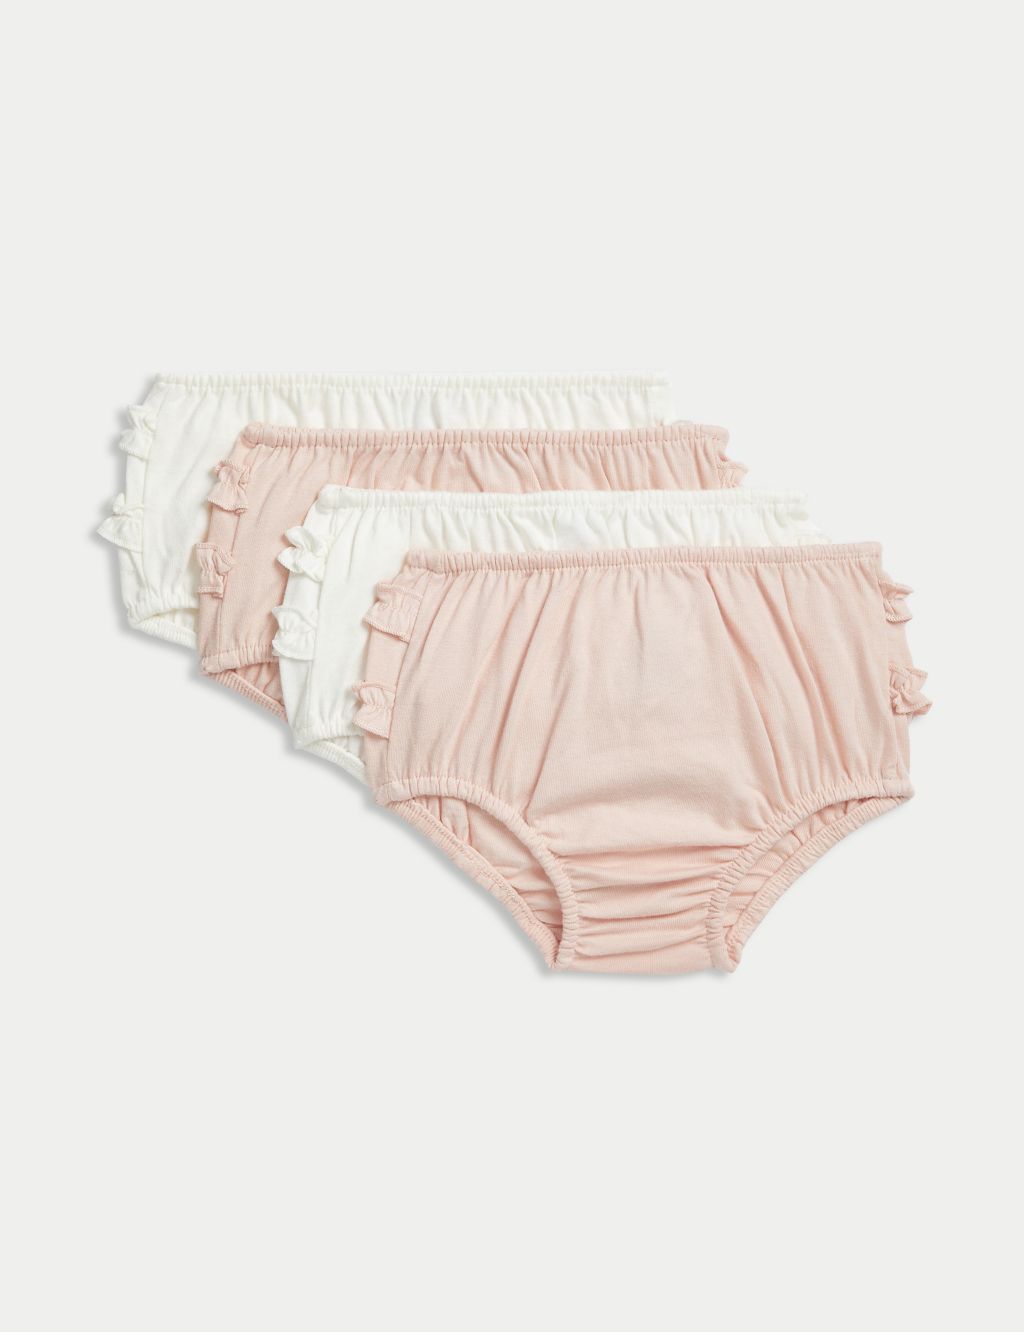 Pink Frilly Cotton Knickers, Girls Frilly Pants